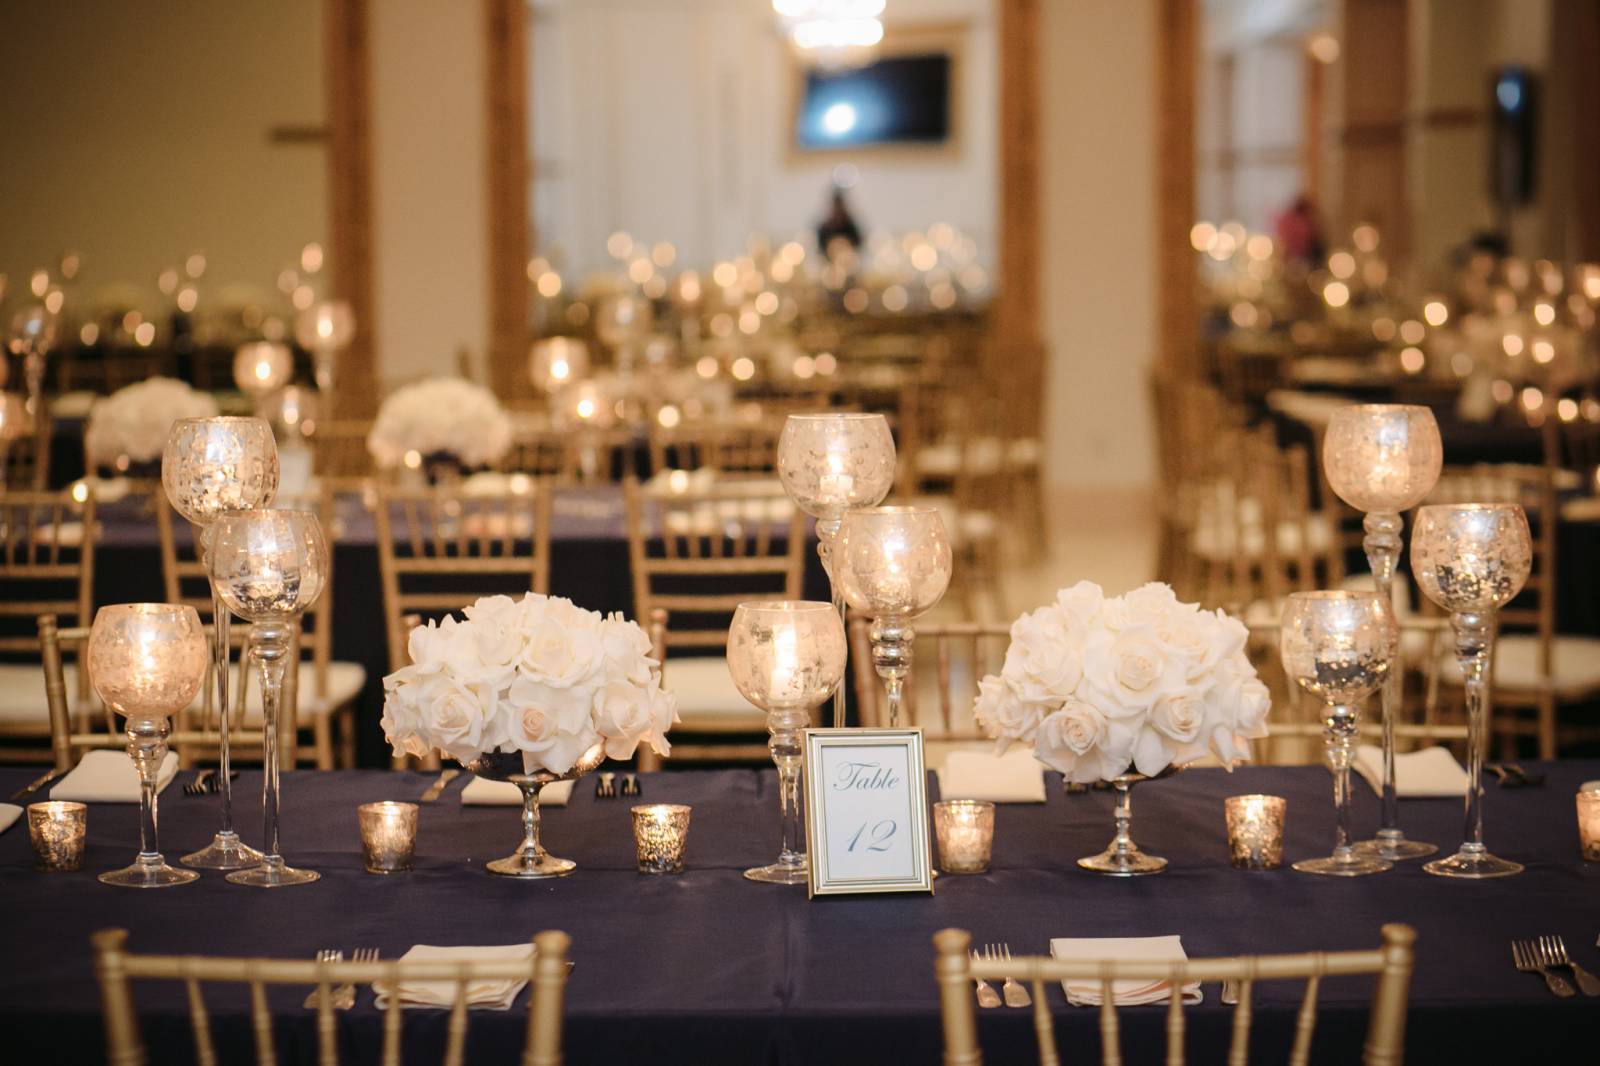 blue tablecloths, gold accents